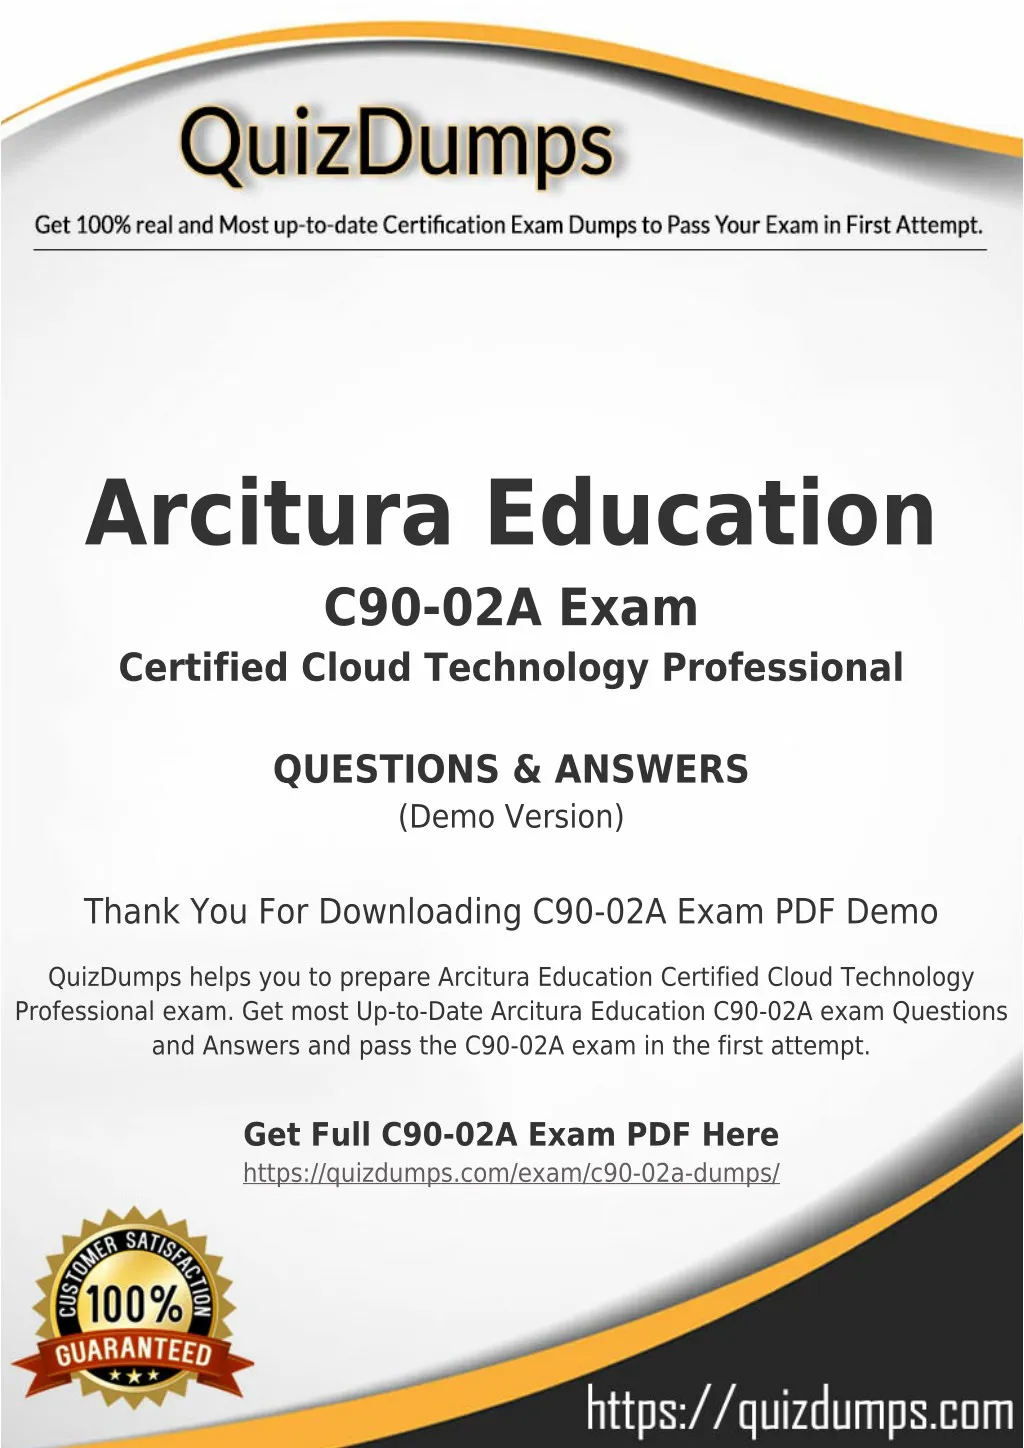 arcitura education c90 02a exam certified cloud